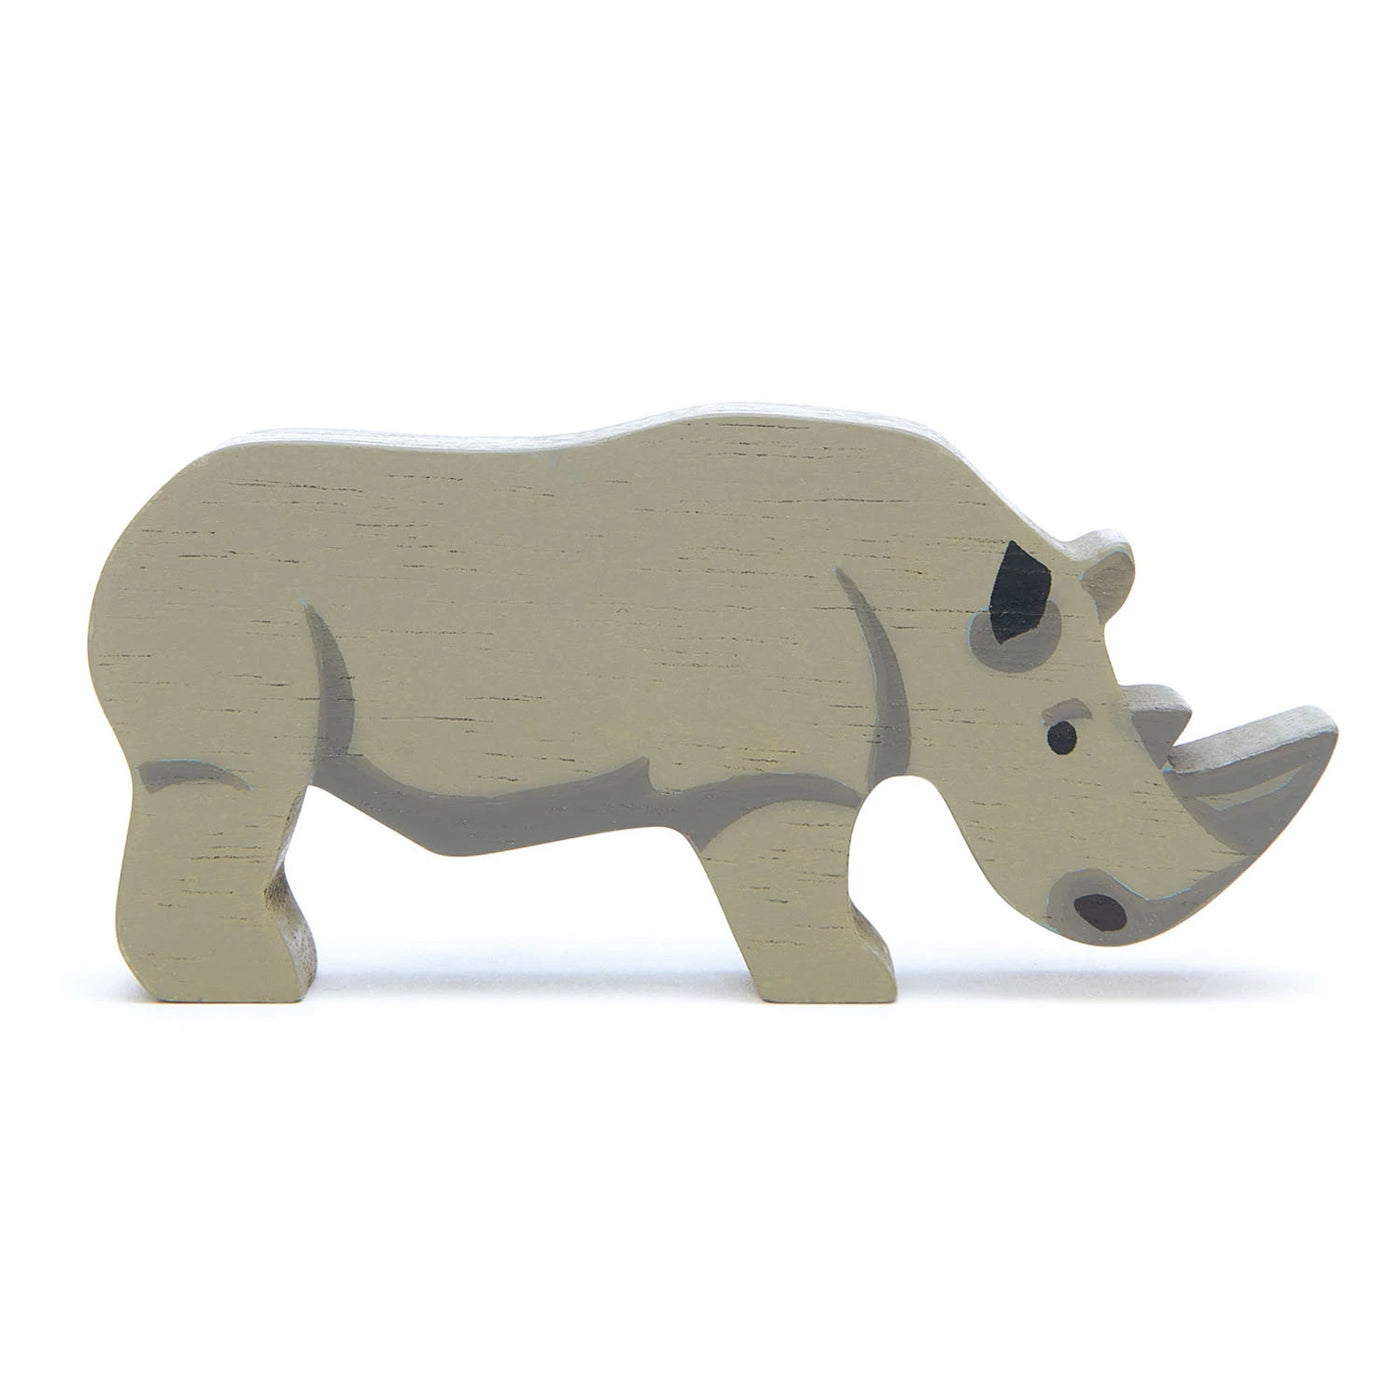 Wooden safari rhinoceros toy for kids made of eco-friendly wood